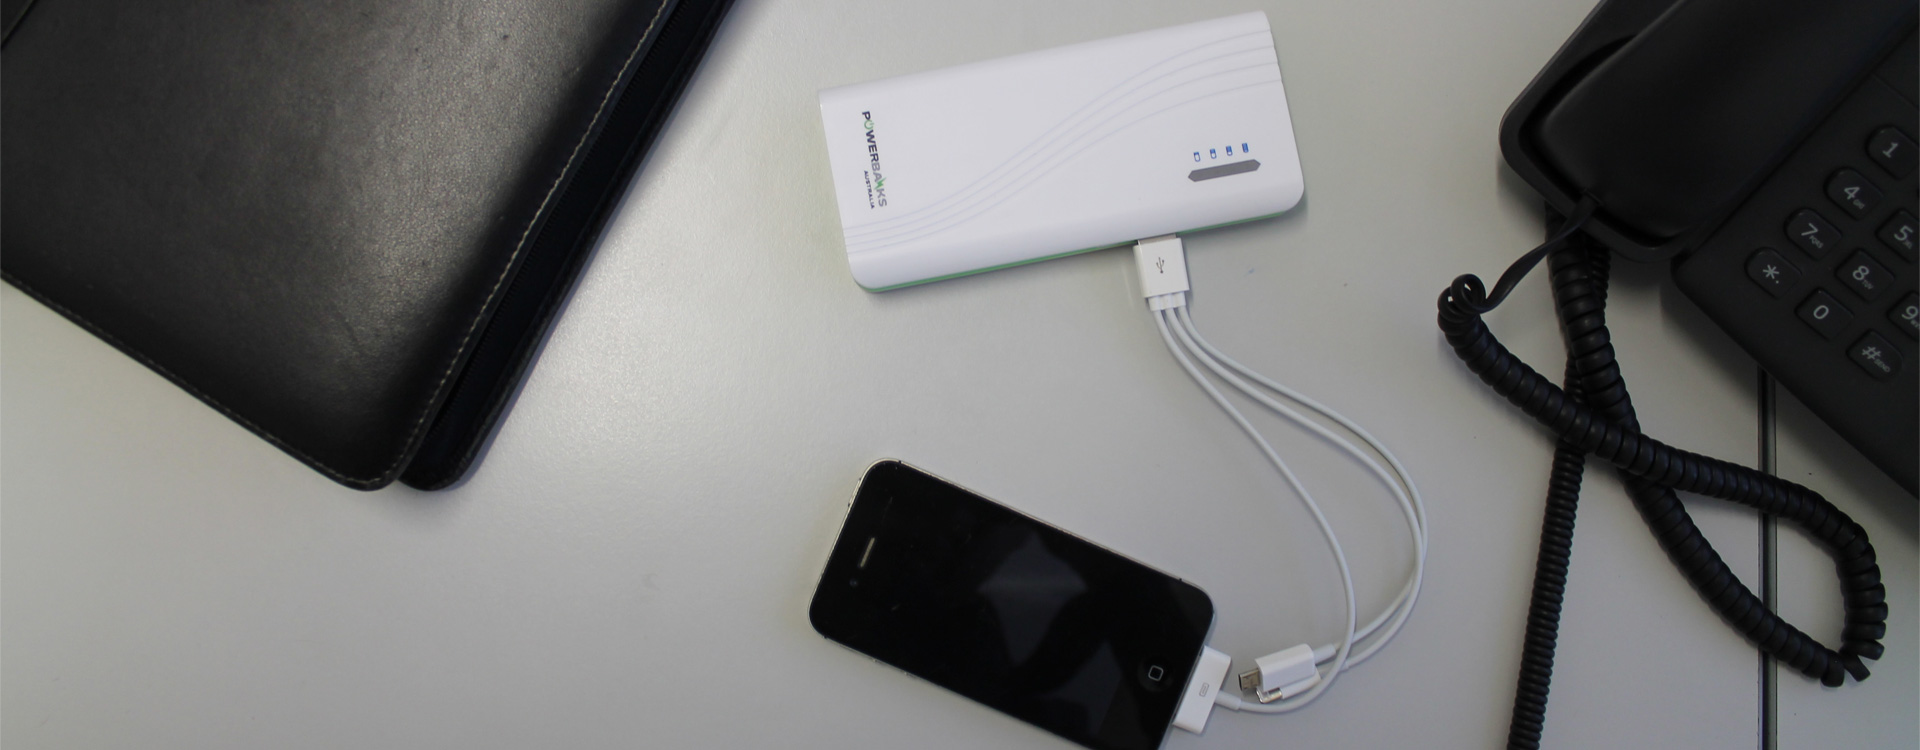 Unique Ideas for Corporate Gift: Portable Power Bank